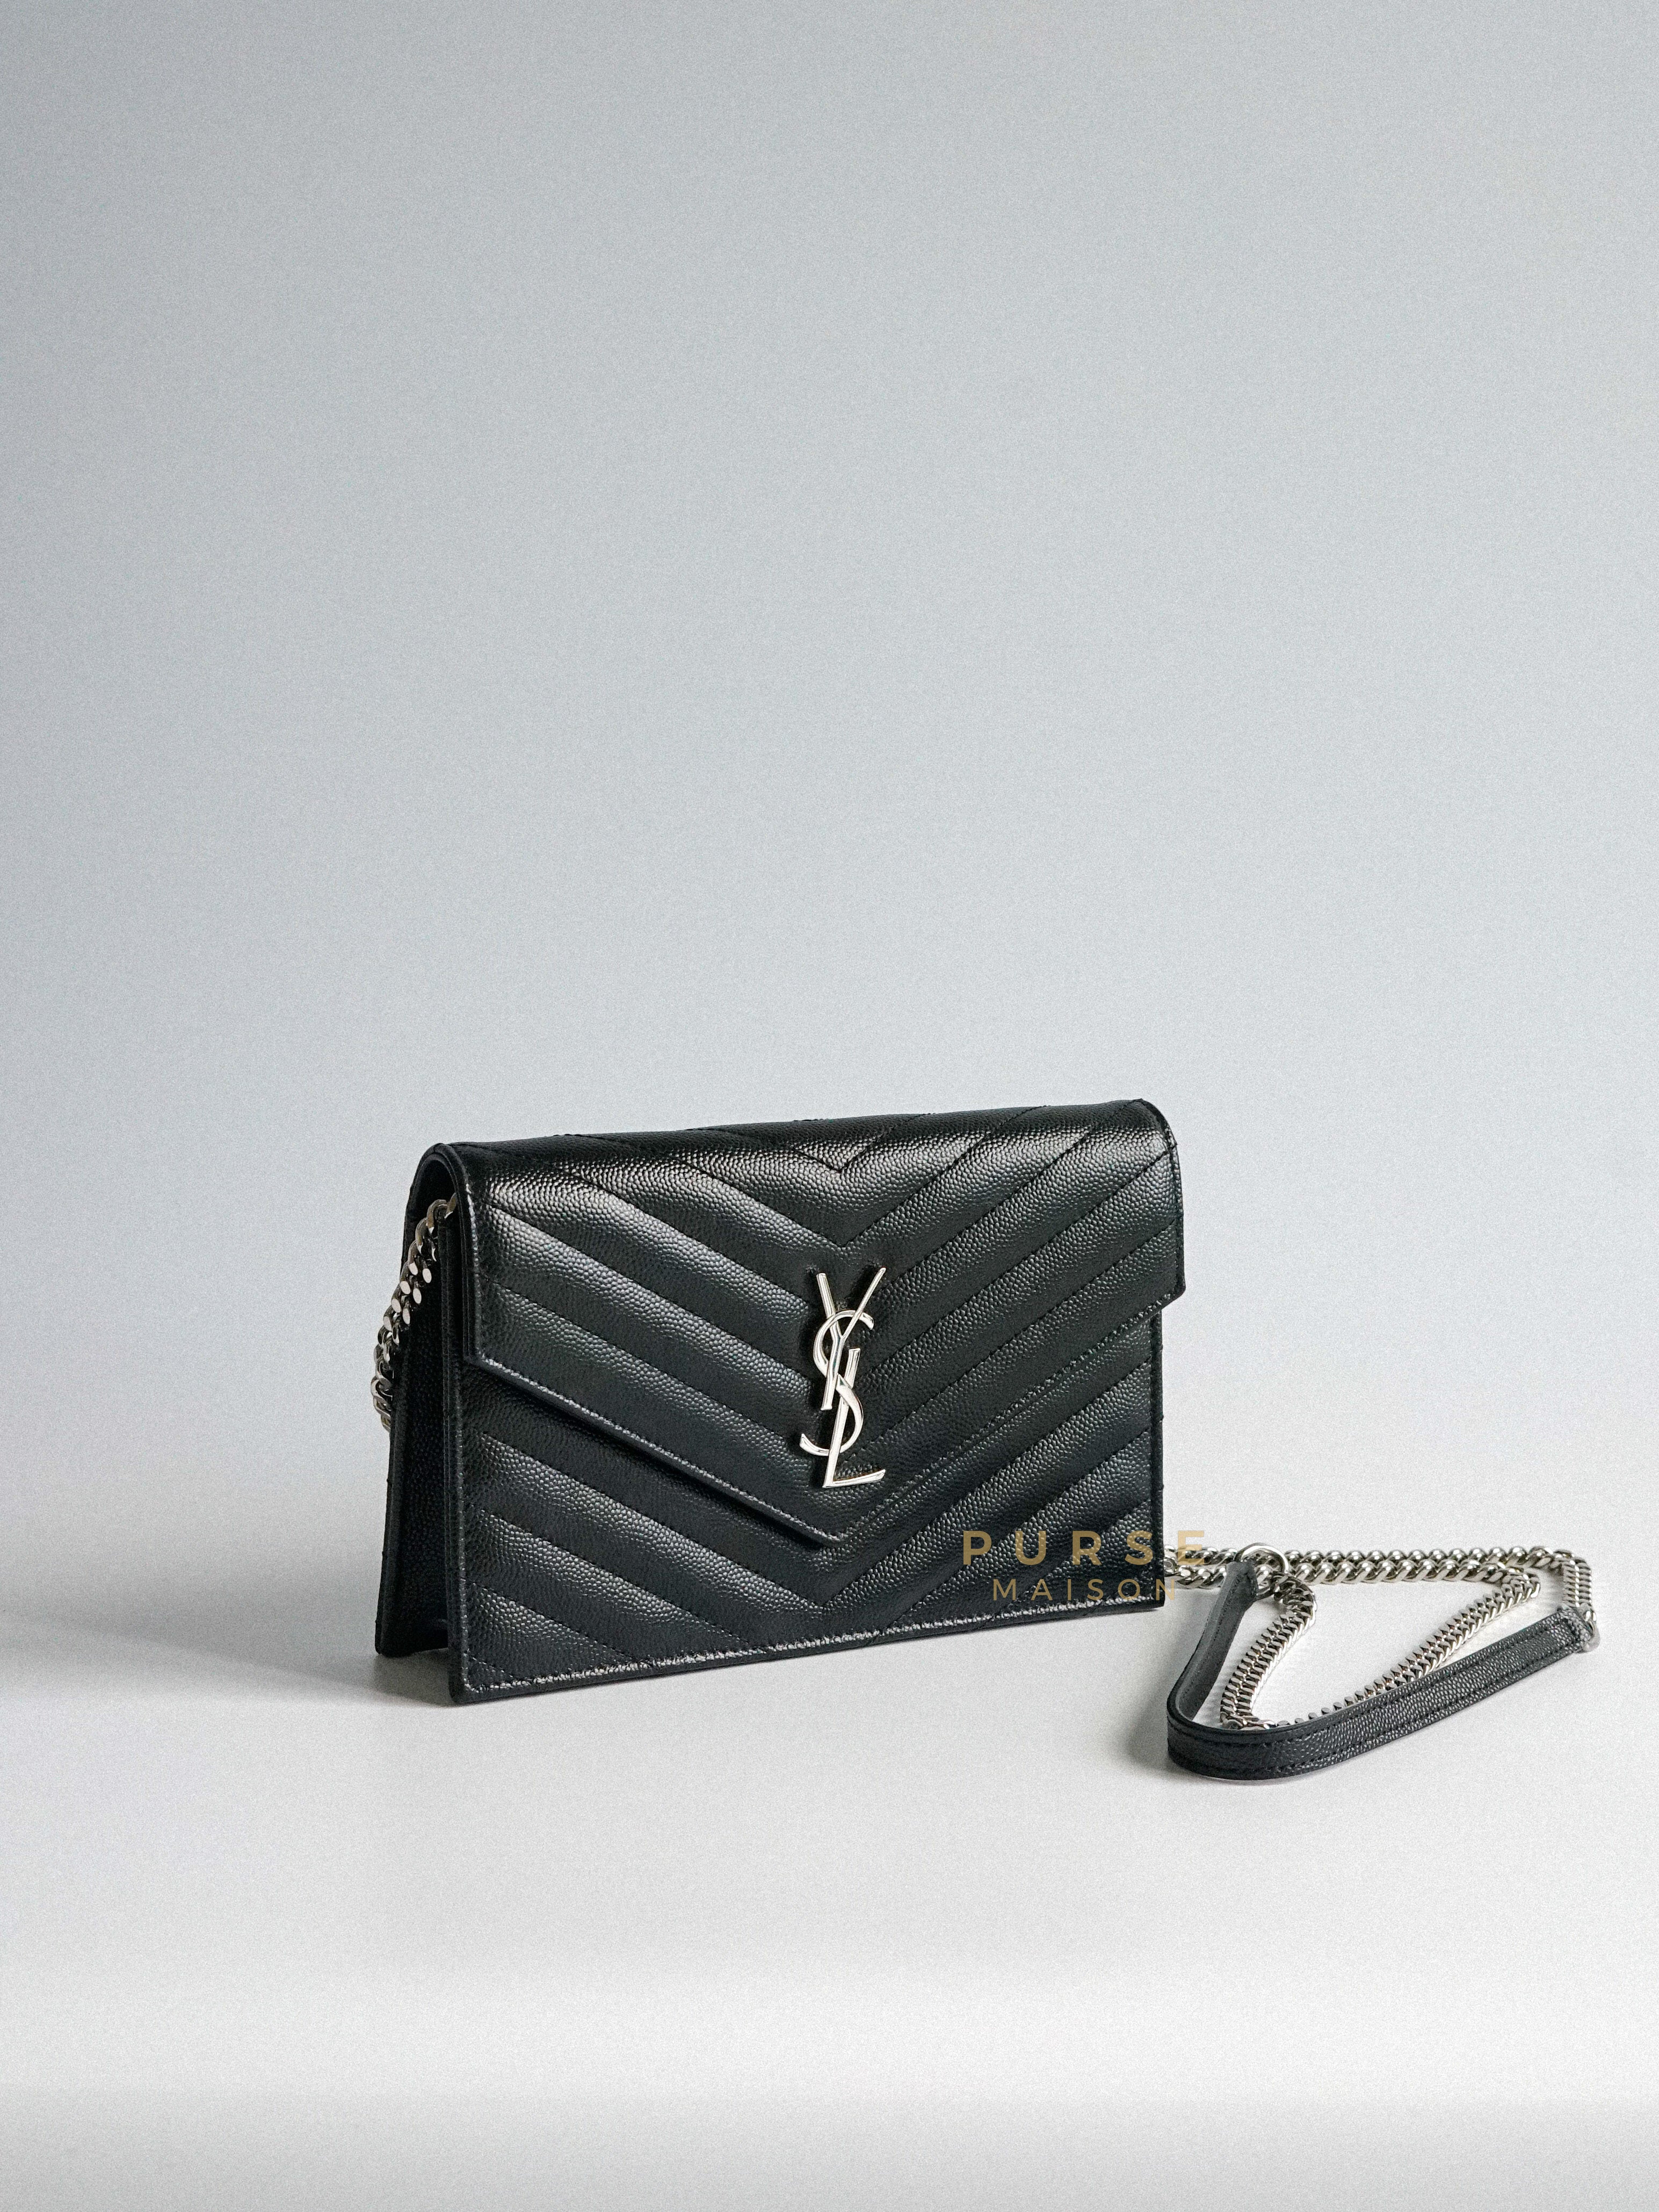 Wallet on Chain Small in Monogram Grain Black Leather and Silver Hardware | Purse Maison Luxury Bags Shop